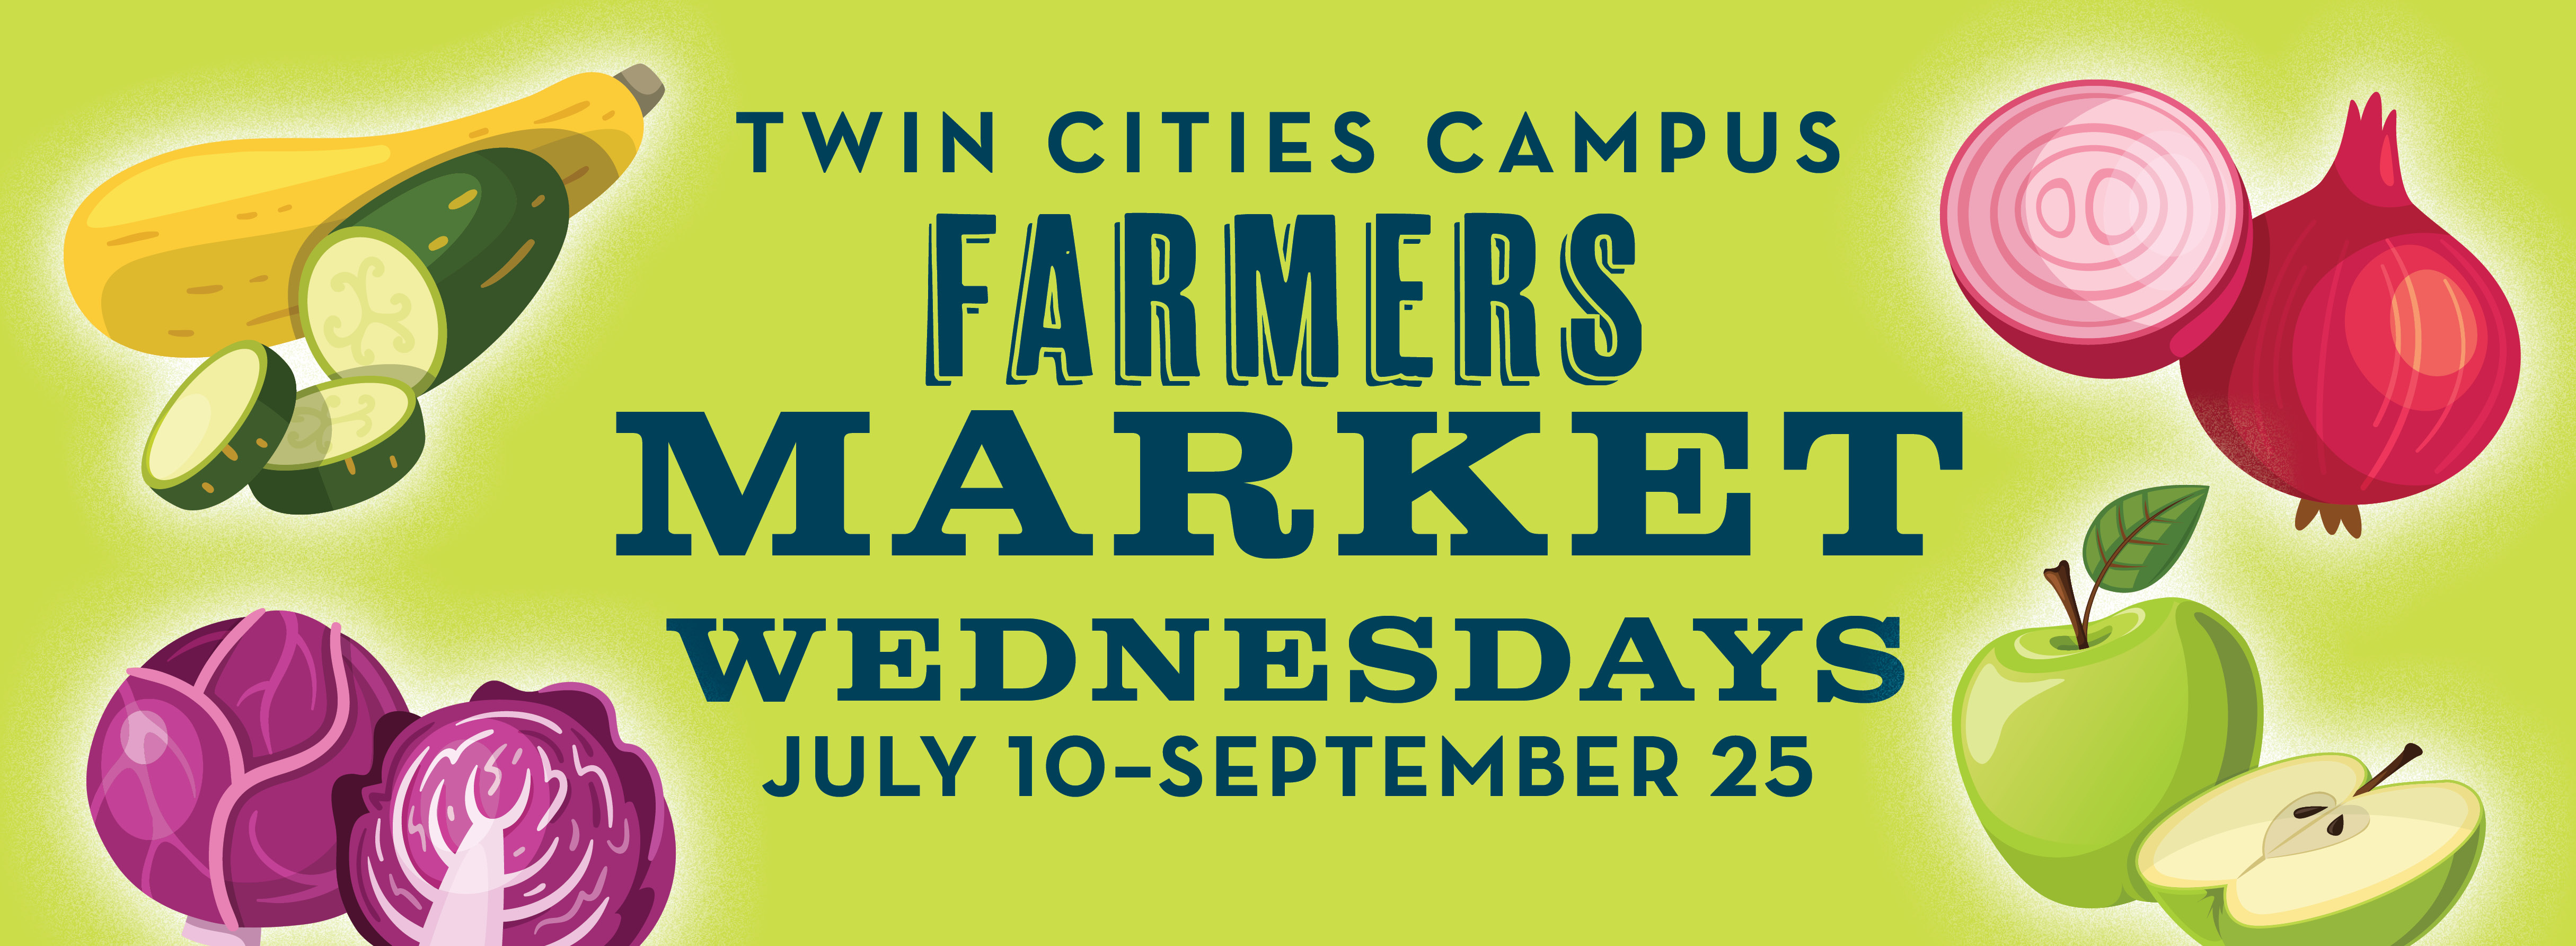 Twin Cities campus Farmers Market! Wednesdays July 10–September 25. Text is surrounded by illustrations of zucchini, red cabbage, onions, and apples.